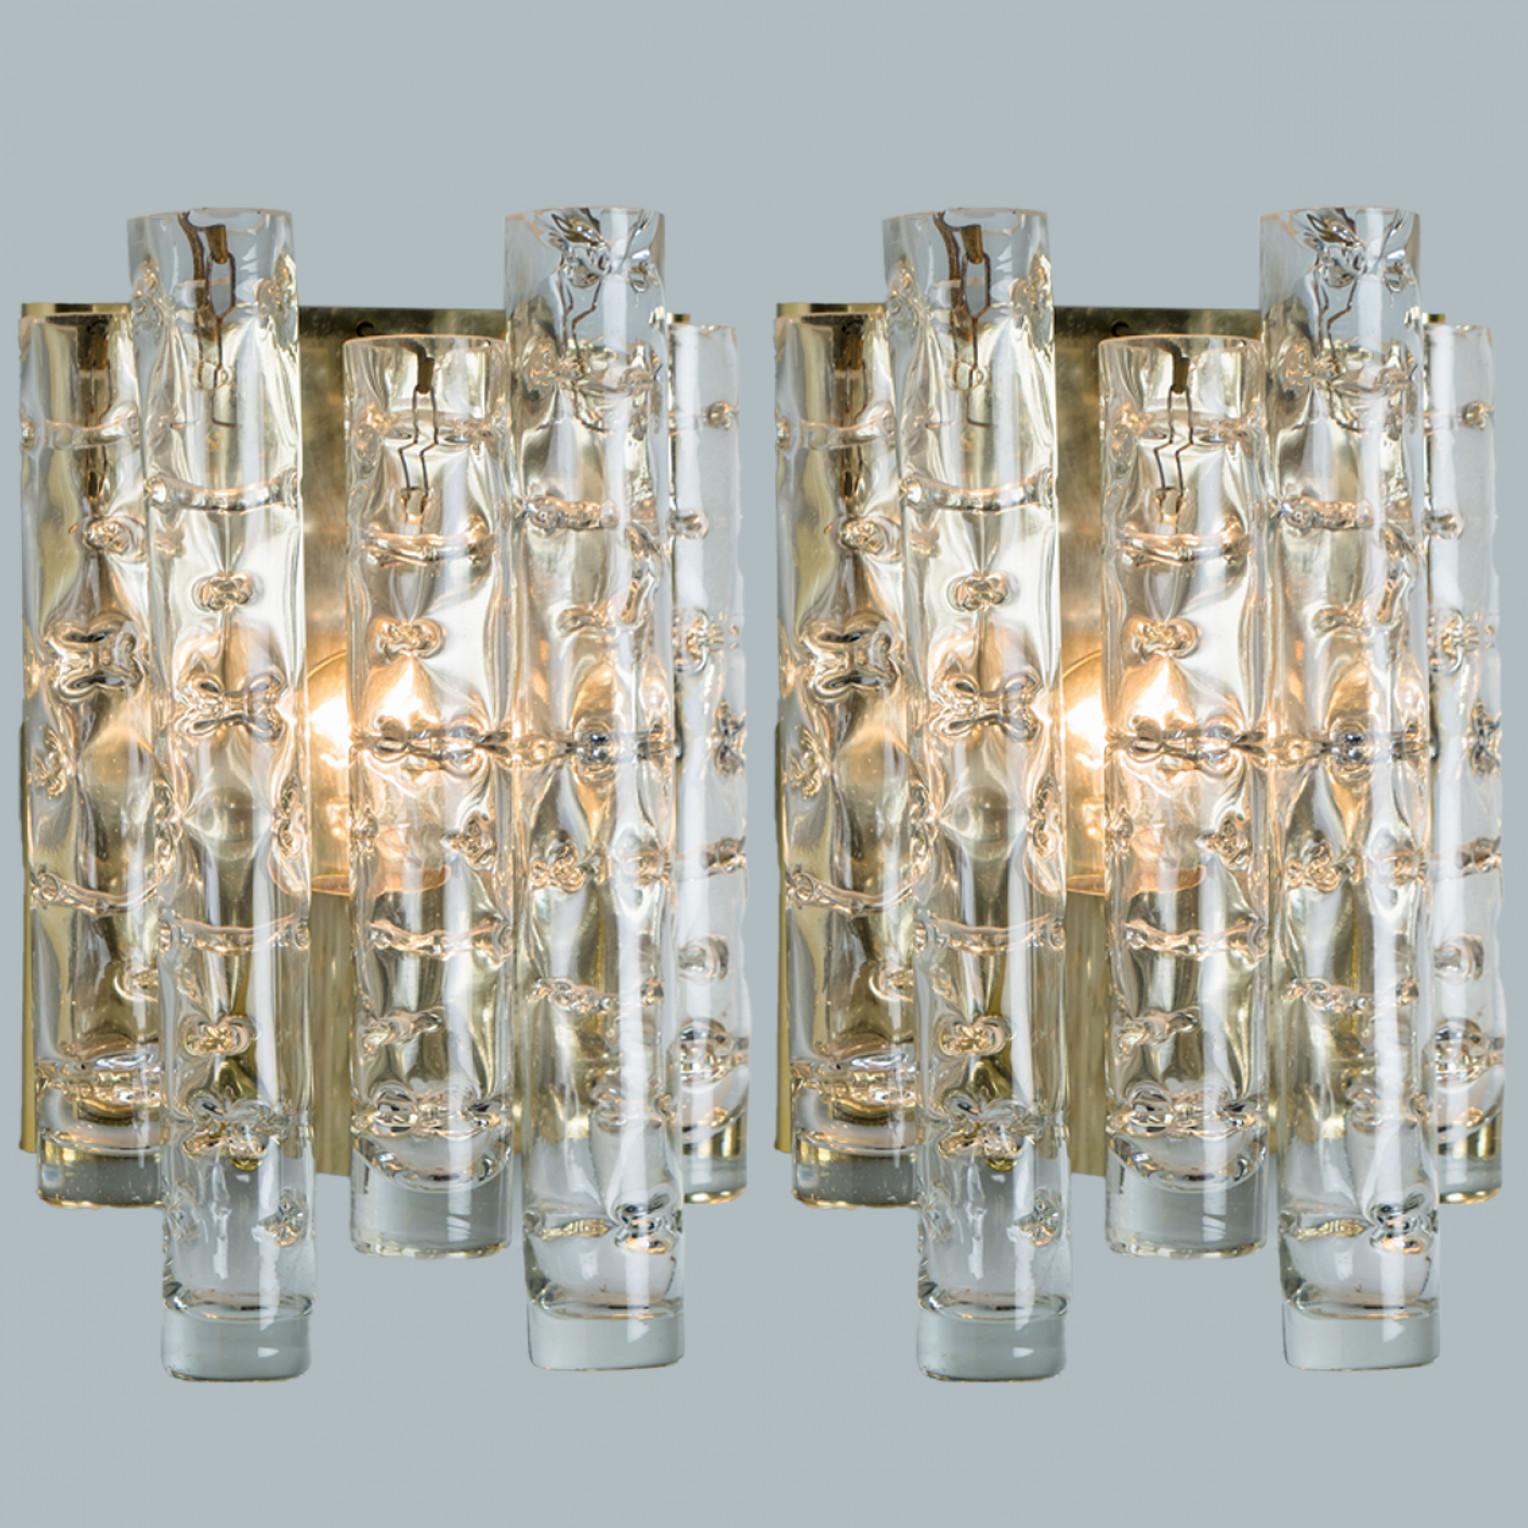 Pair of Structured Tubes Wall Lights by Doria Leuchten, 1960s For Sale 6